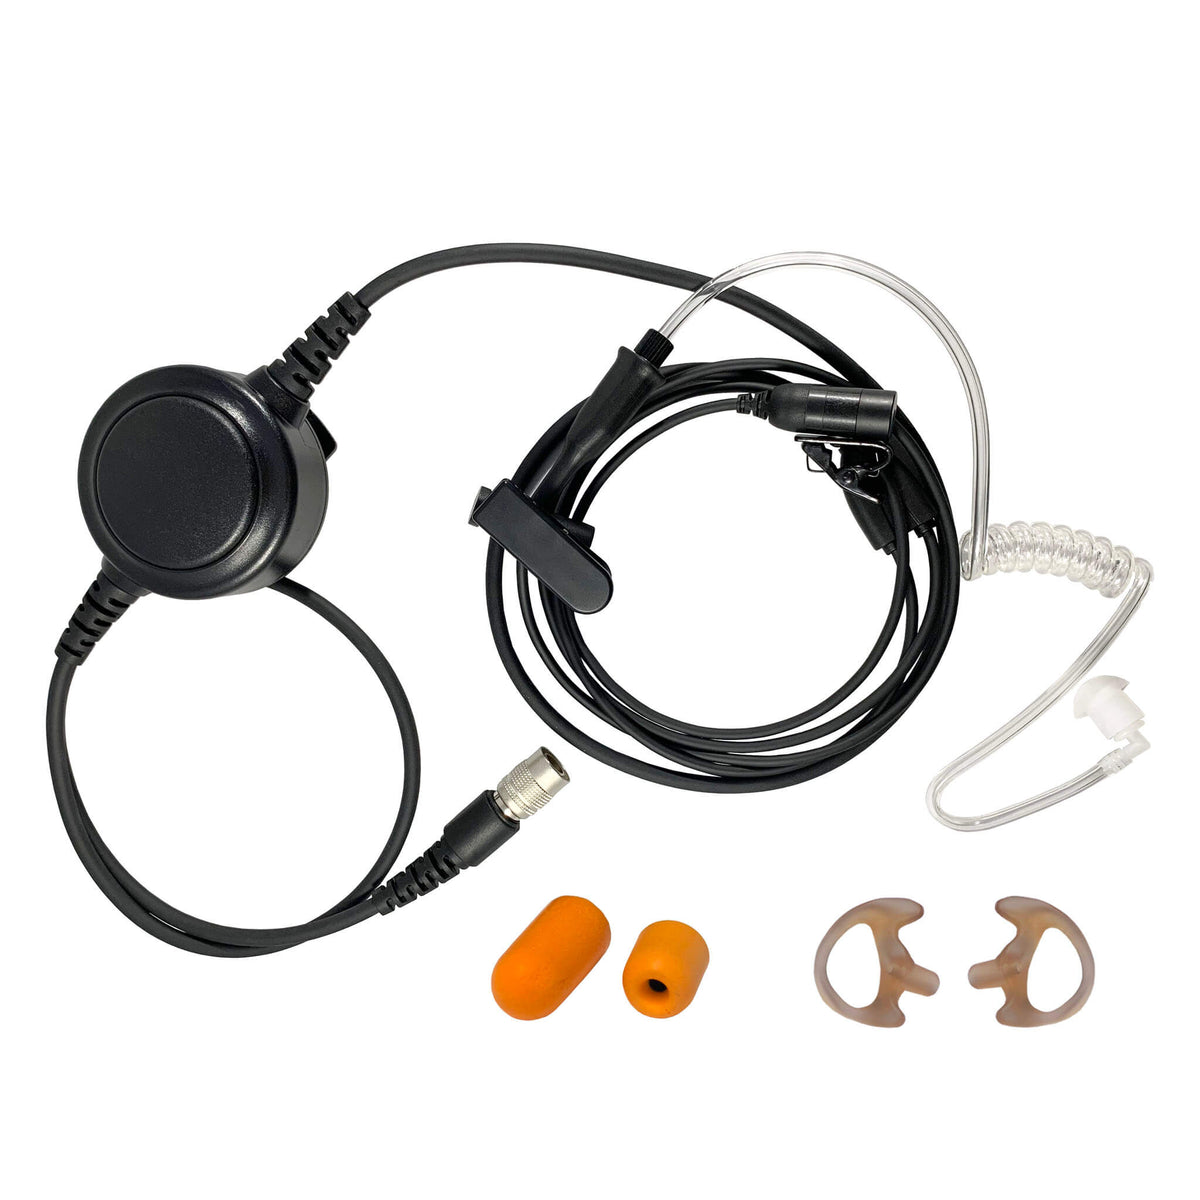 Tactical Mic / Earpiece / PTT Kit With Quick Disconnect (Hirose